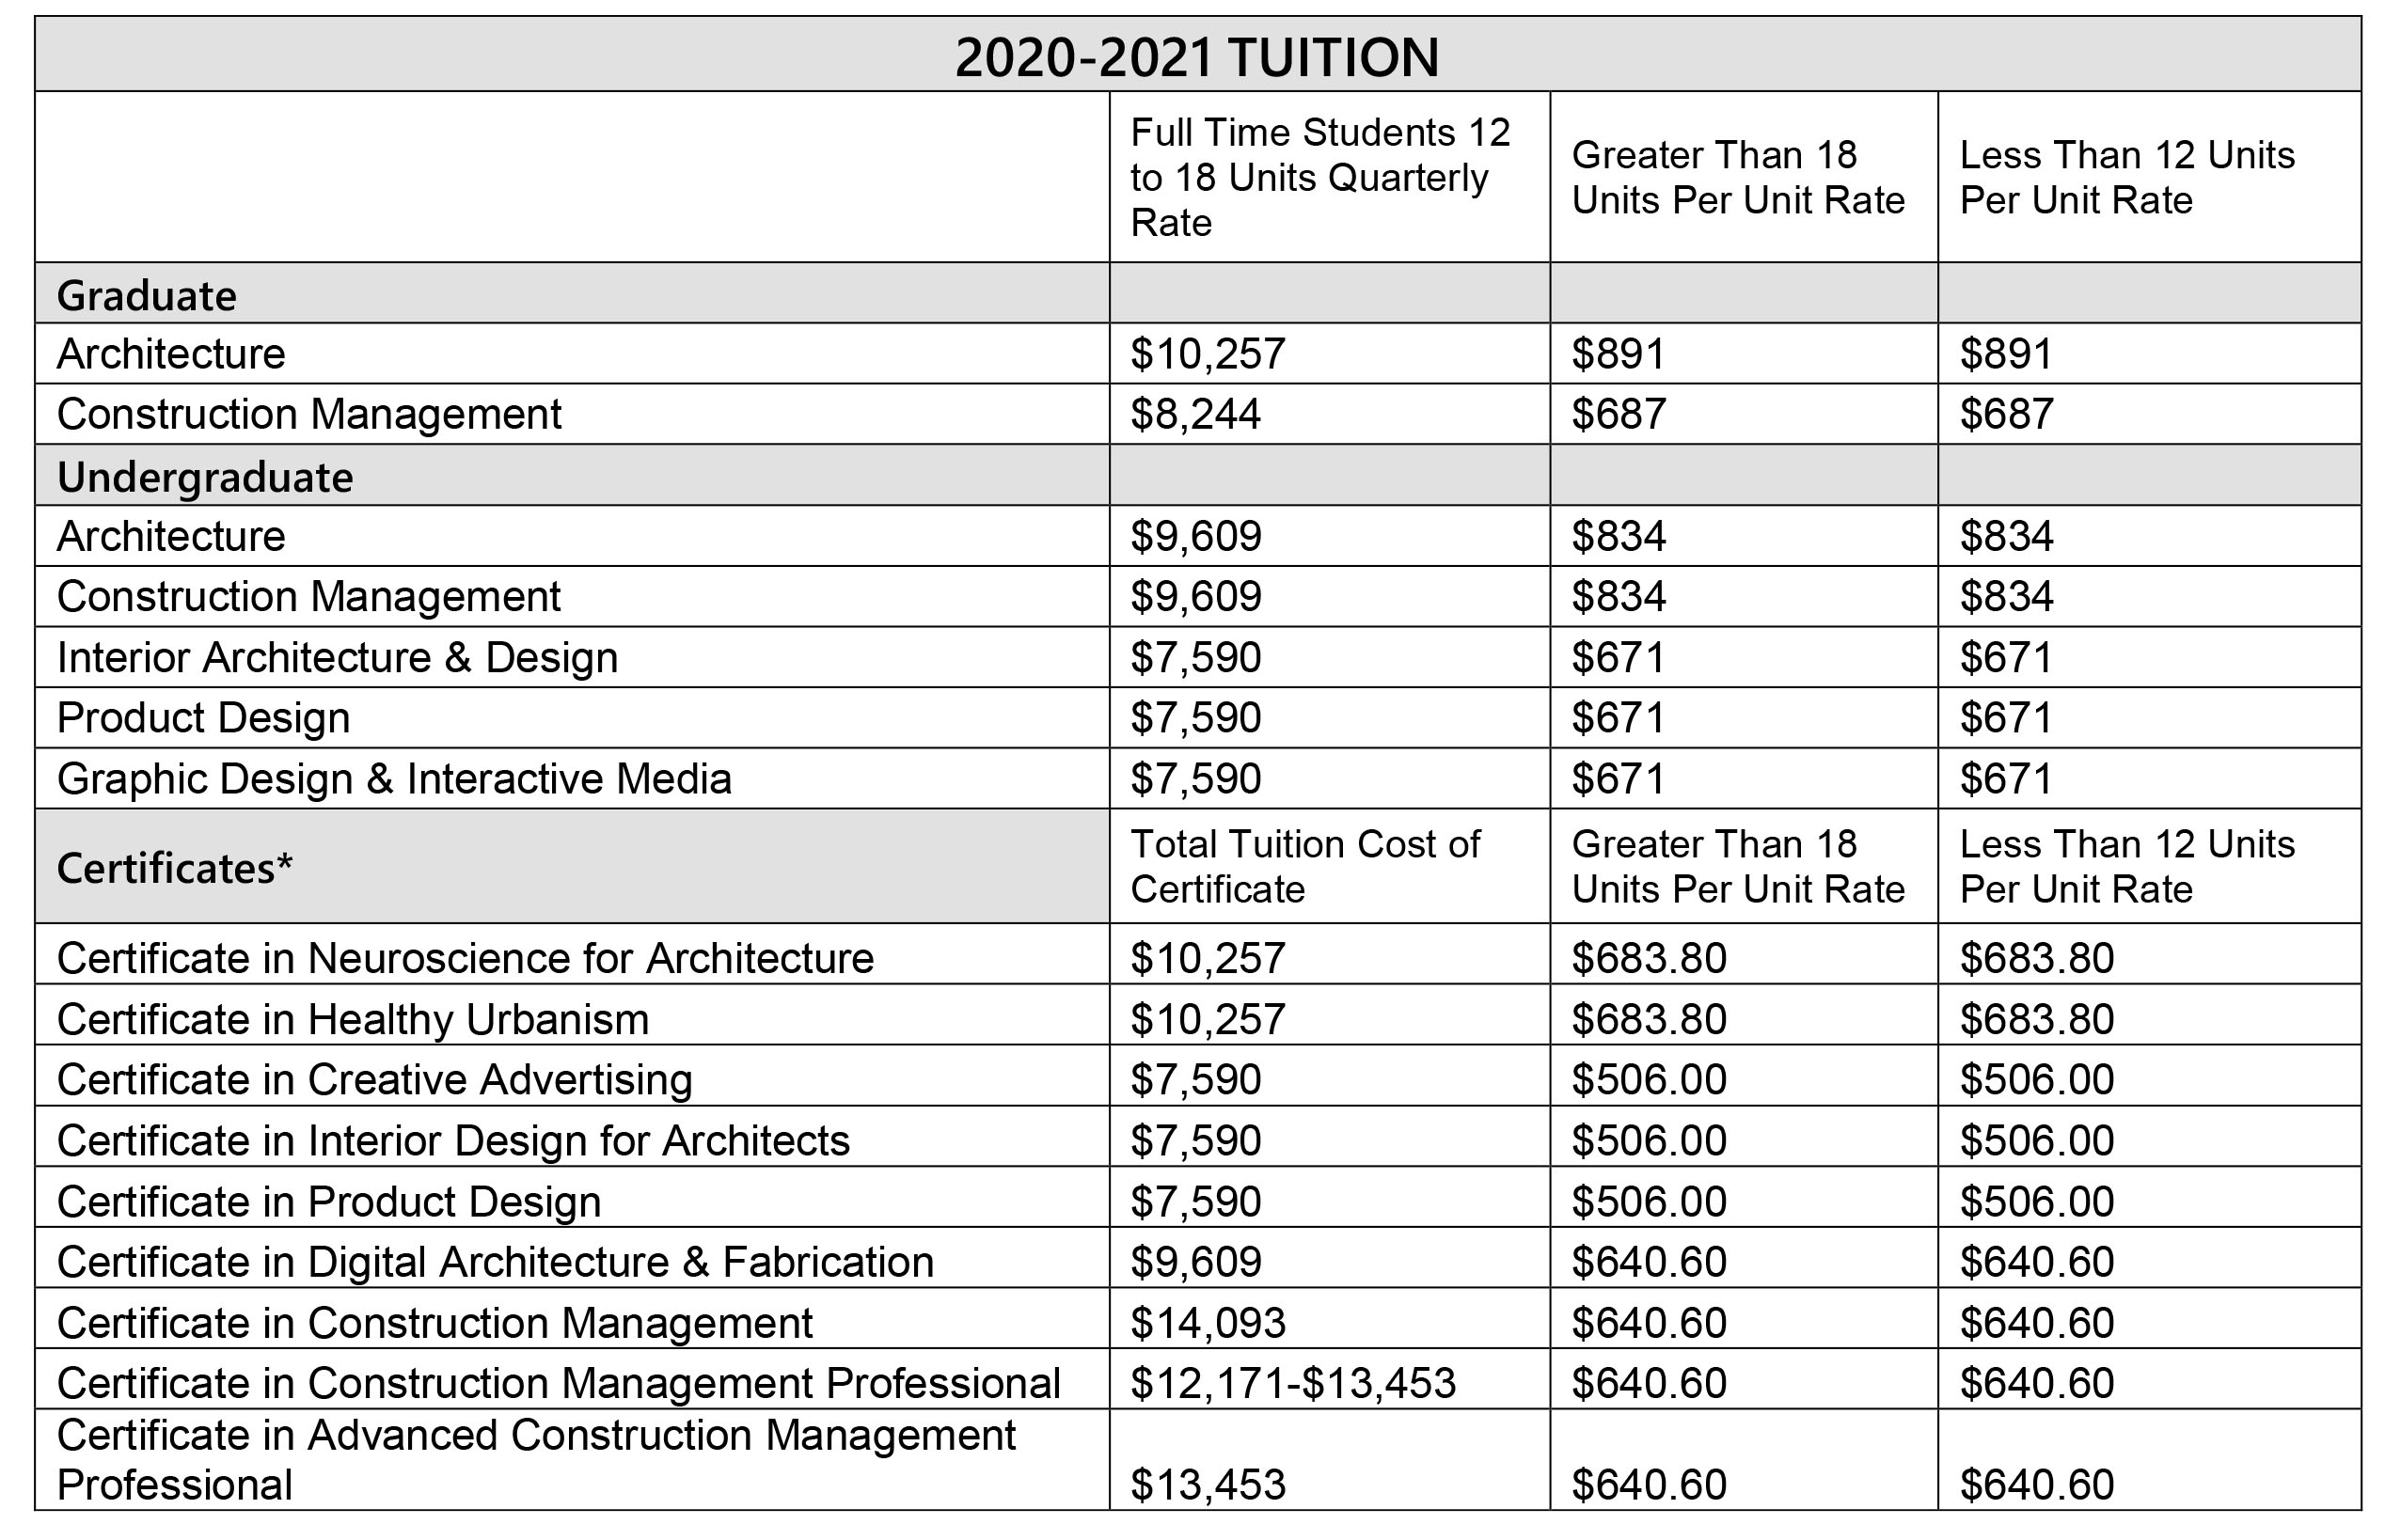 Tuition, 2020-2021